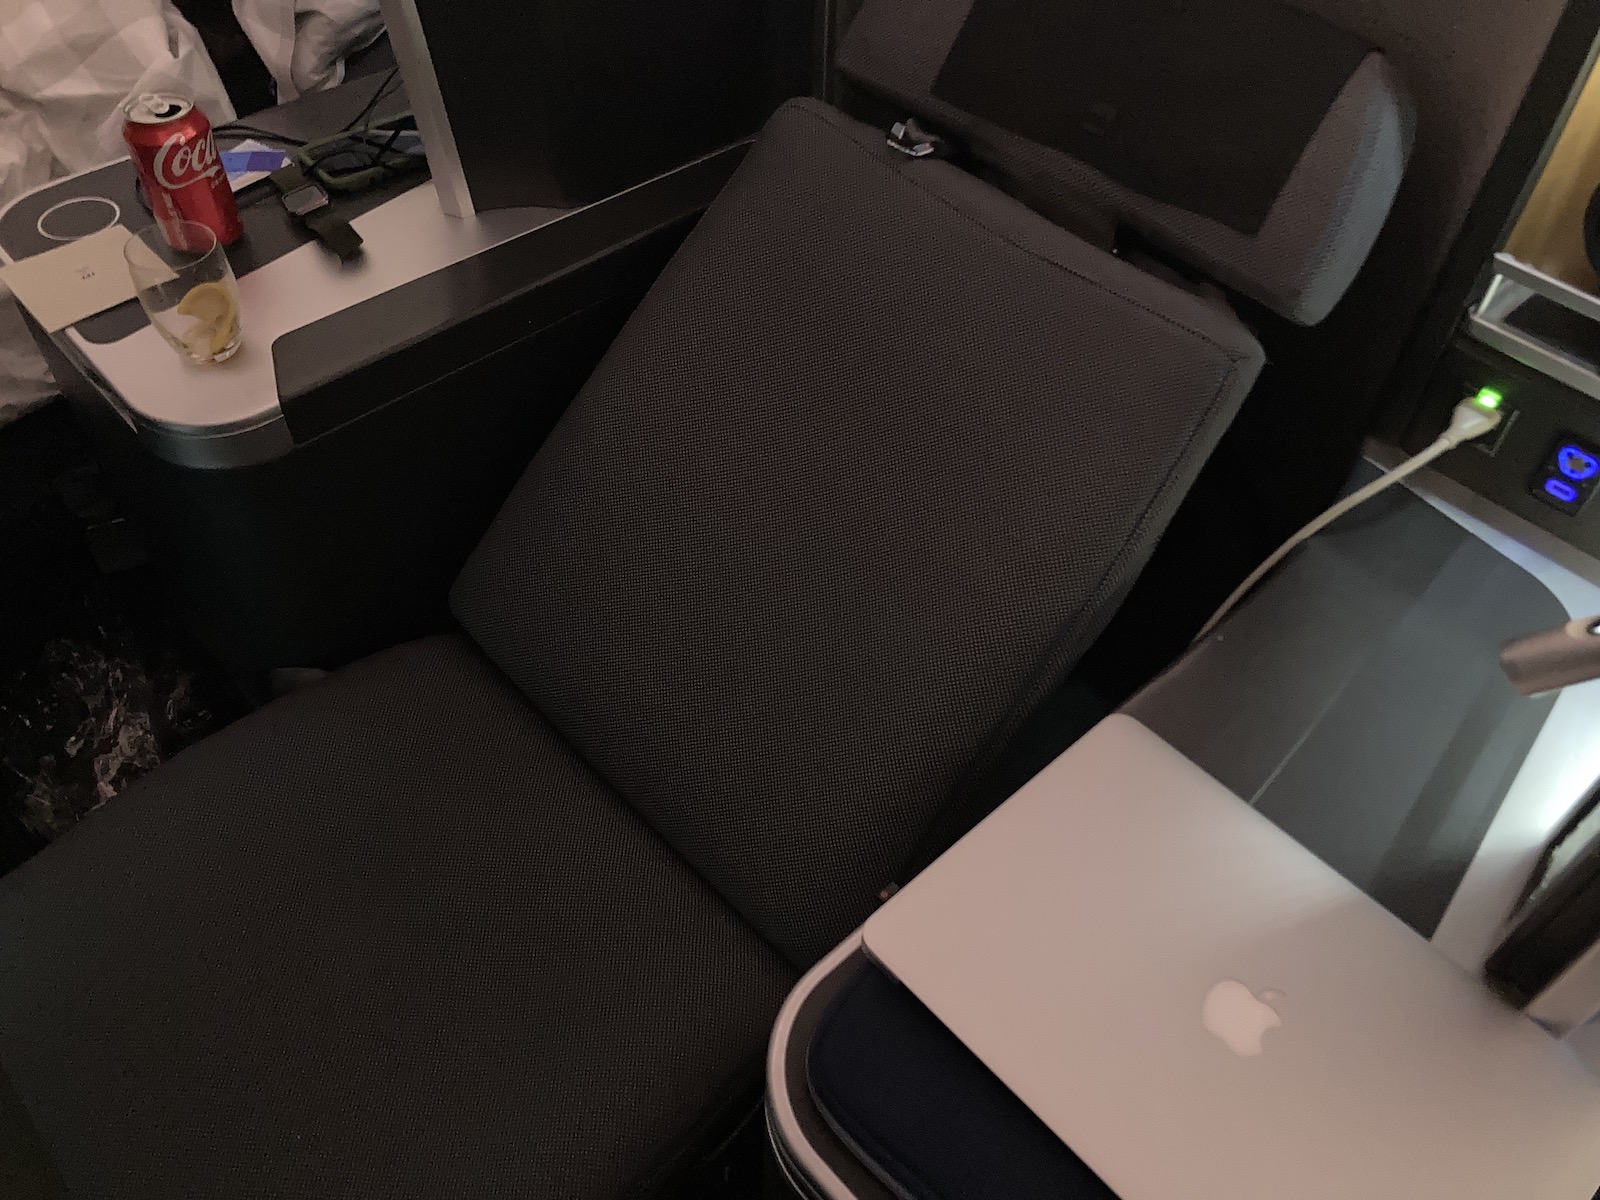 My negative review largely comes from this image of the SAS business class seat not going flat as advertised.